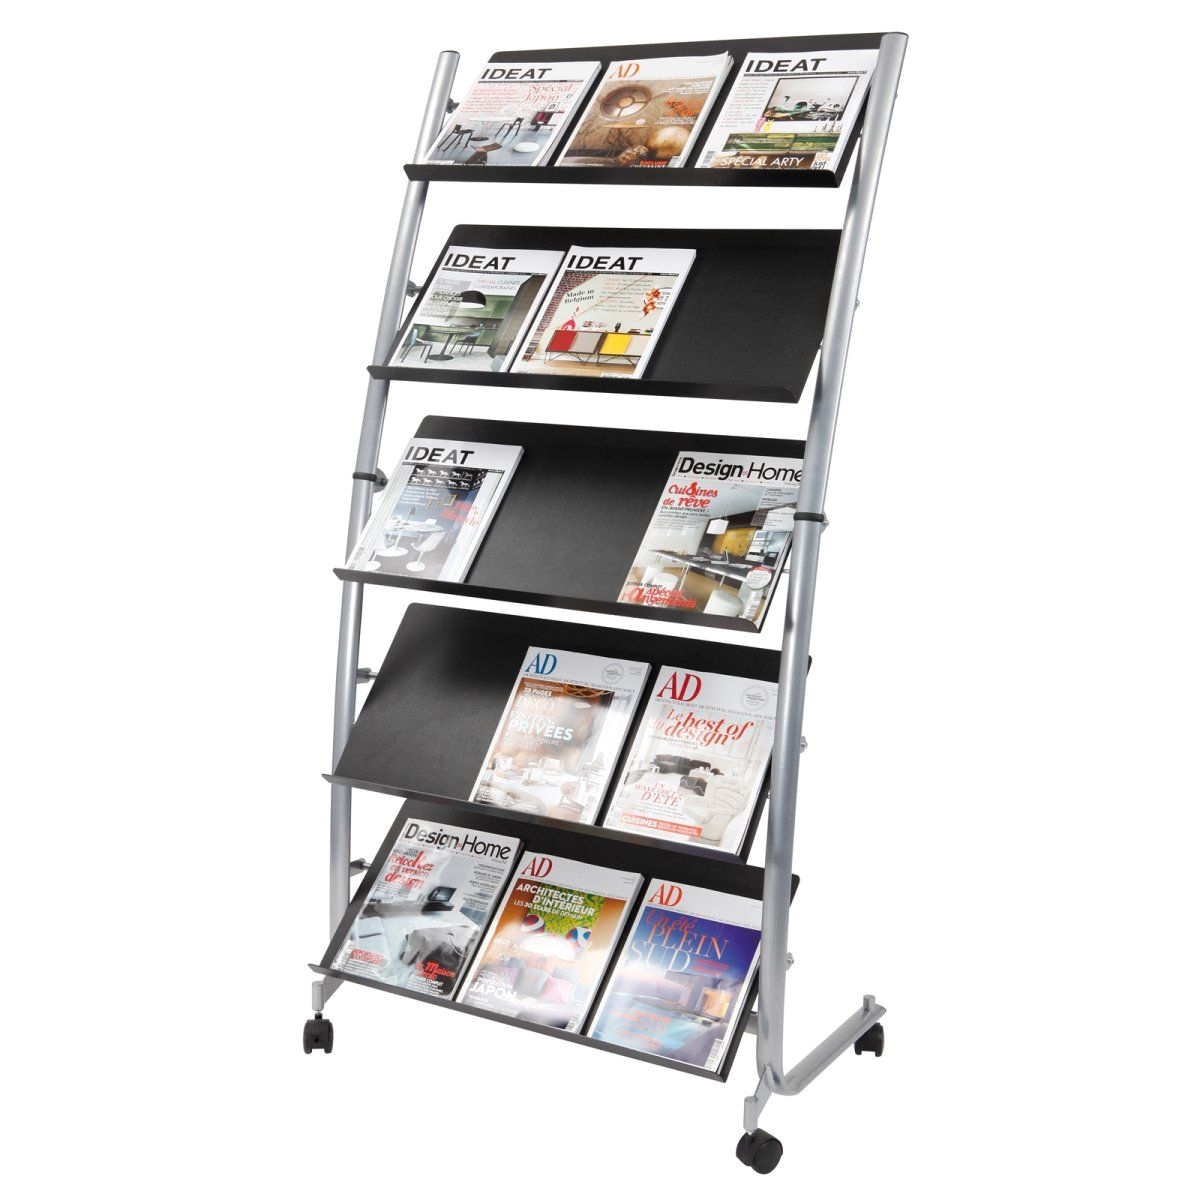 Rotating Magazine Rack for Office Alba Large Mobile Literature Display 5 Levels Work tools Pinterest